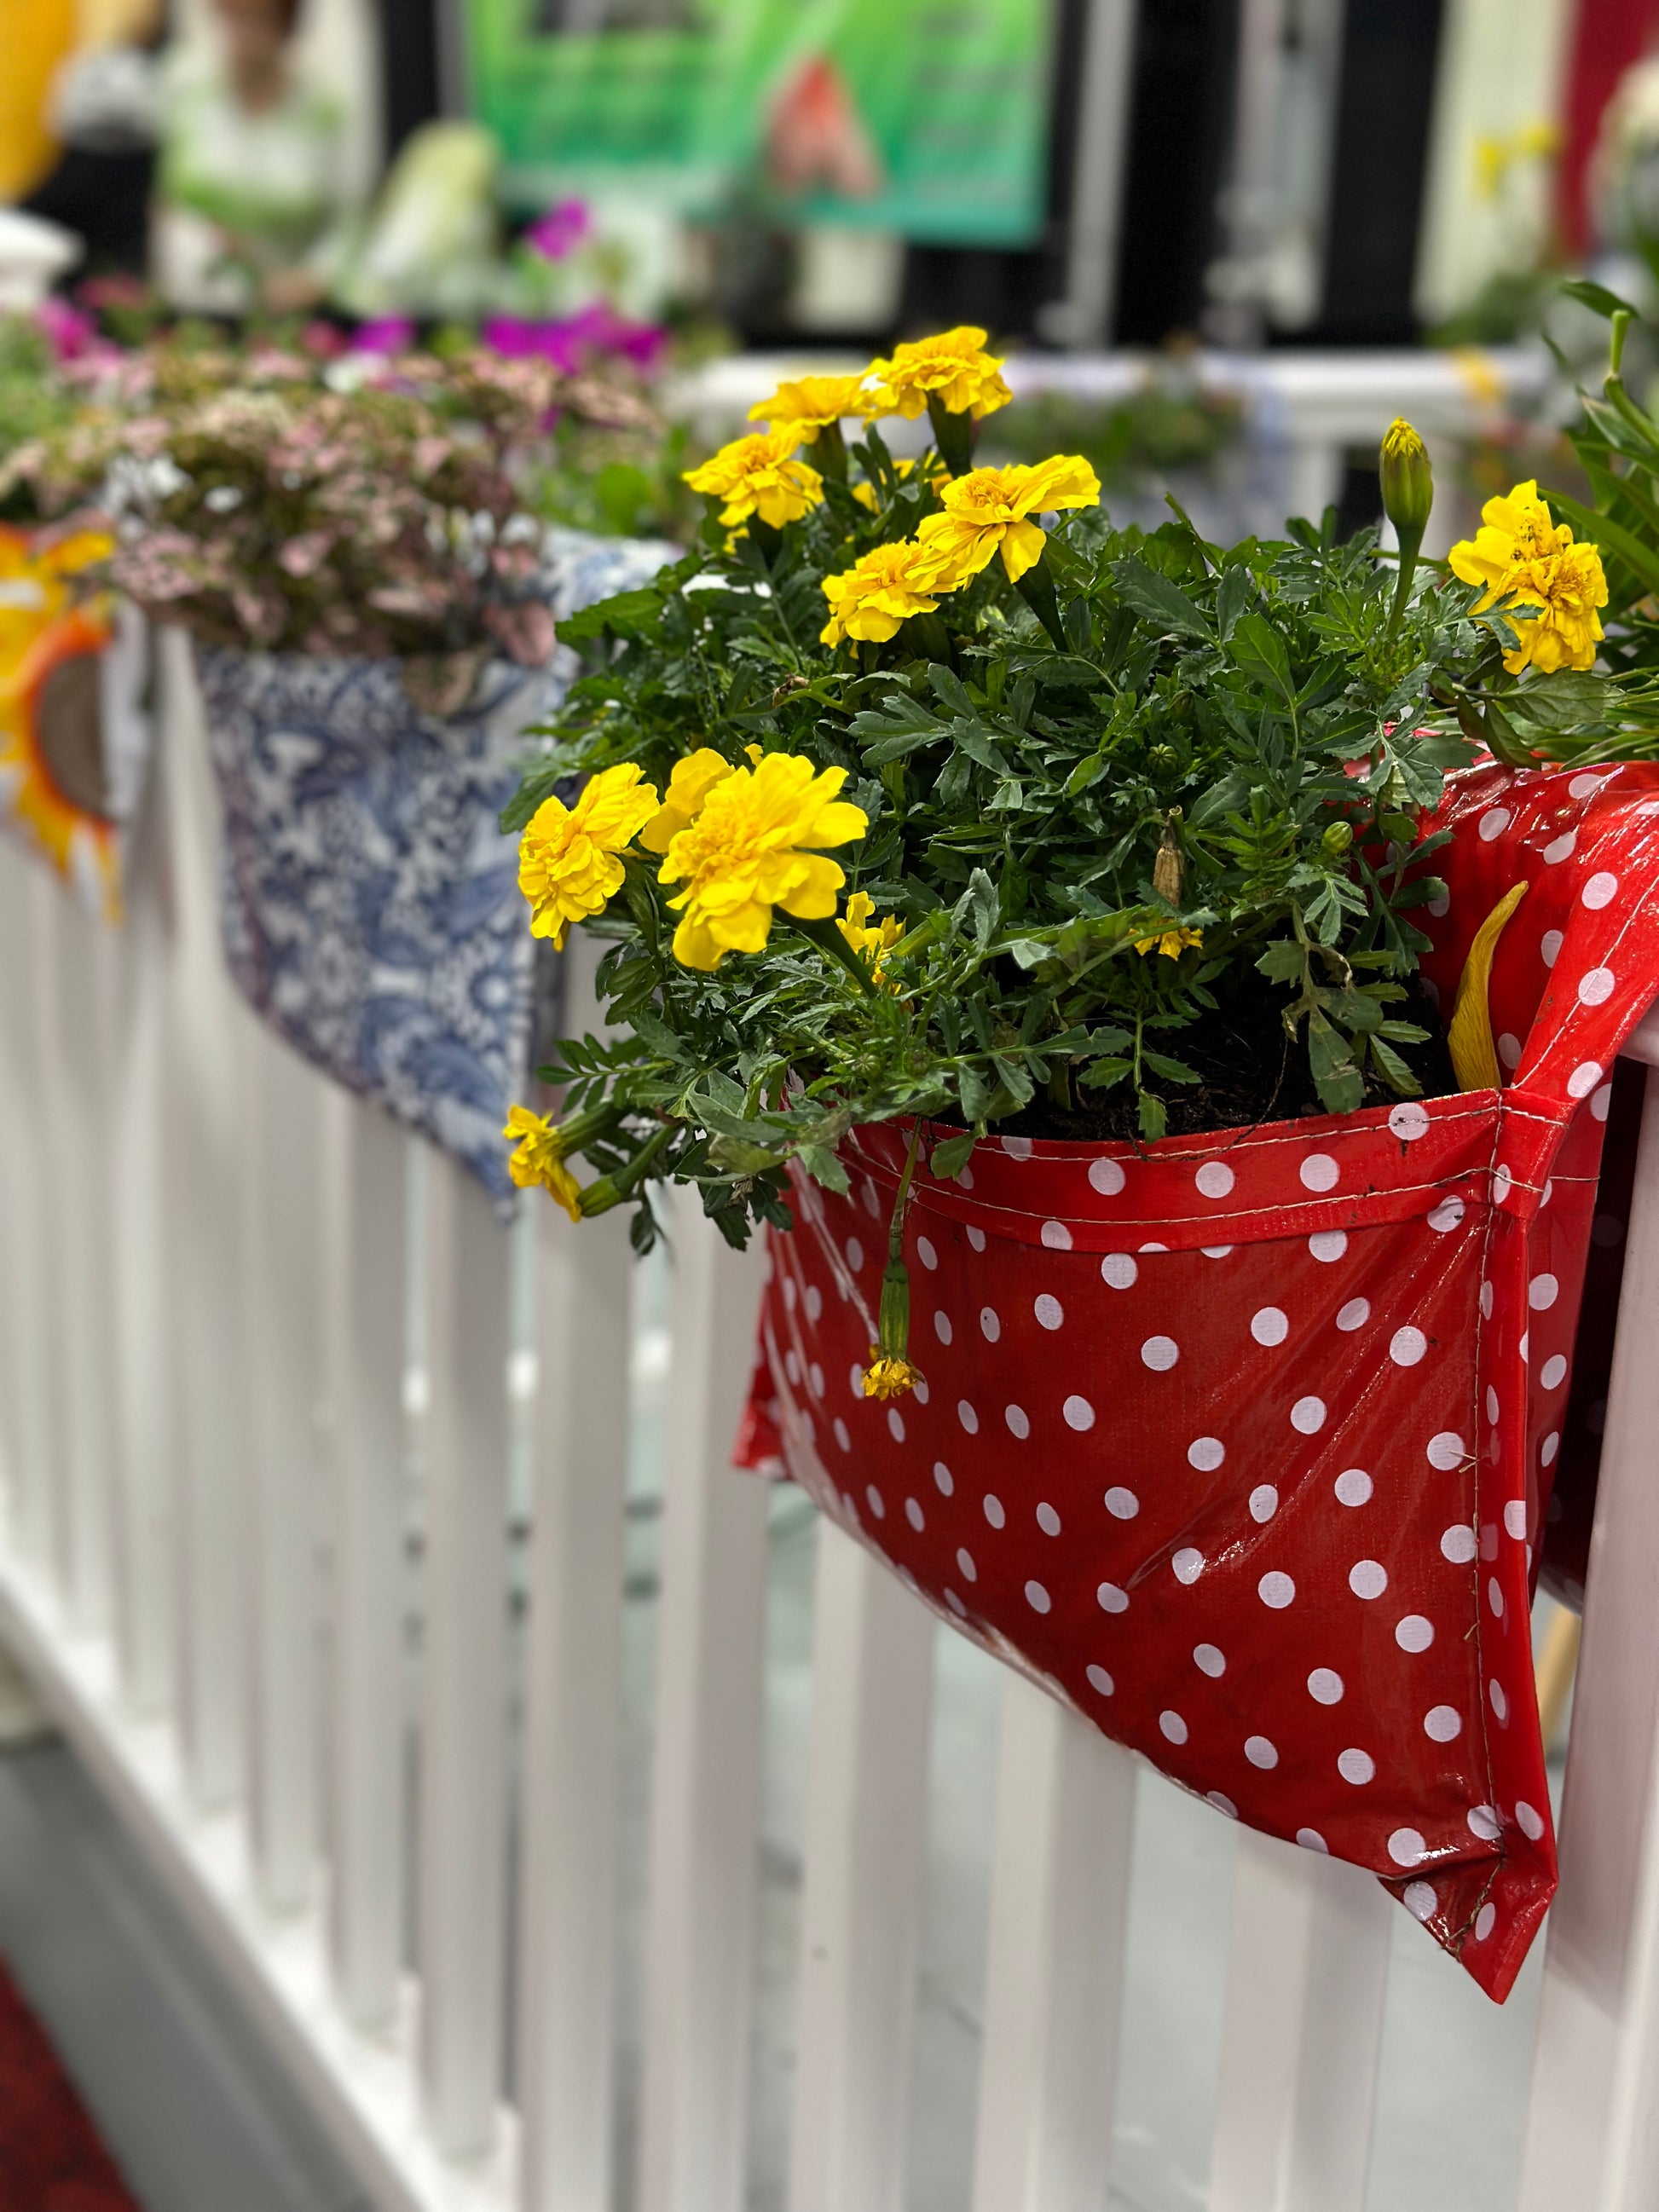 White with Small Red and Blue Stars Pocket Bloomers® Railing Planters